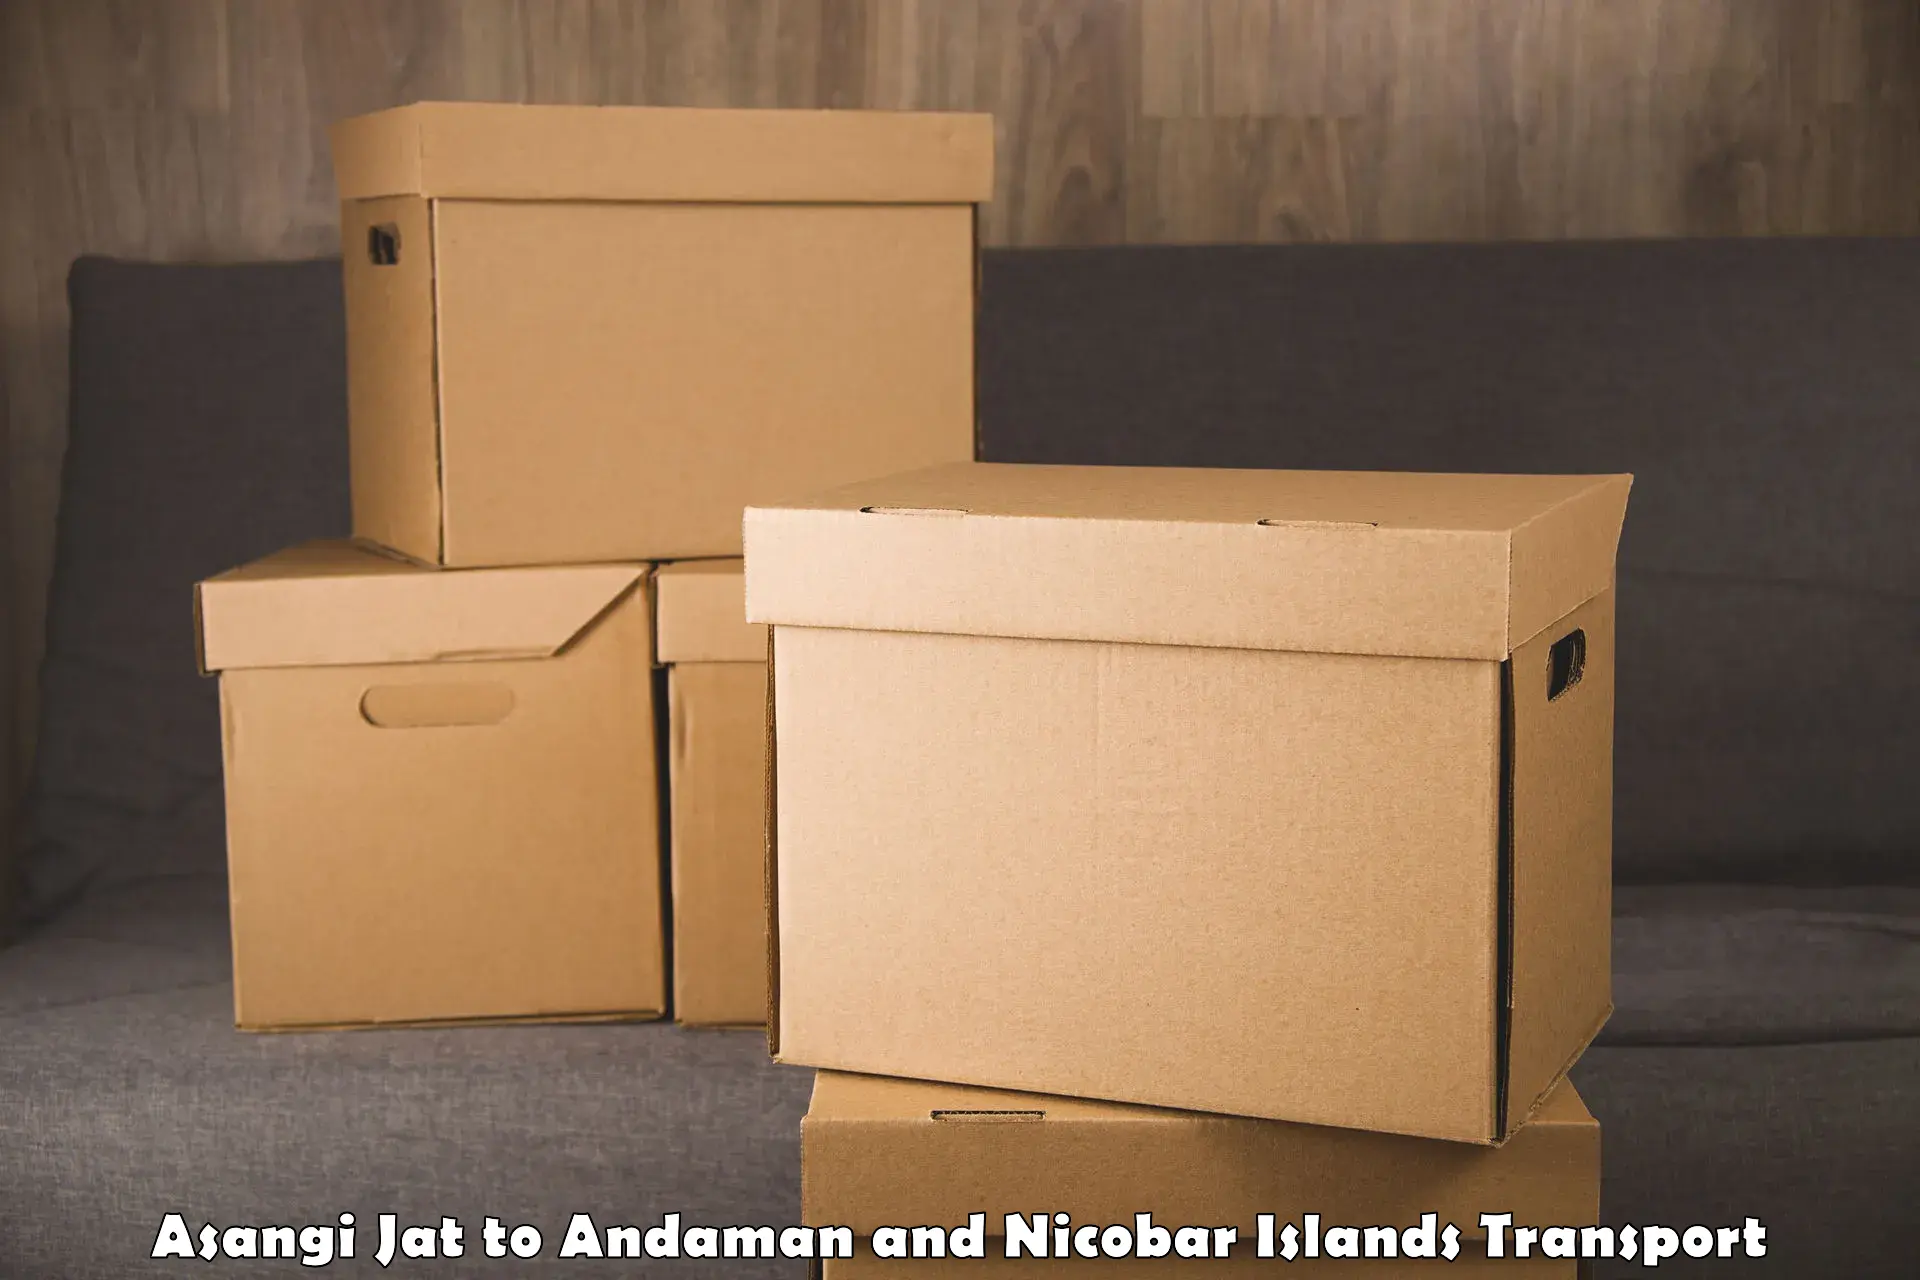 Two wheeler parcel service Asangi Jat to North And Middle Andaman